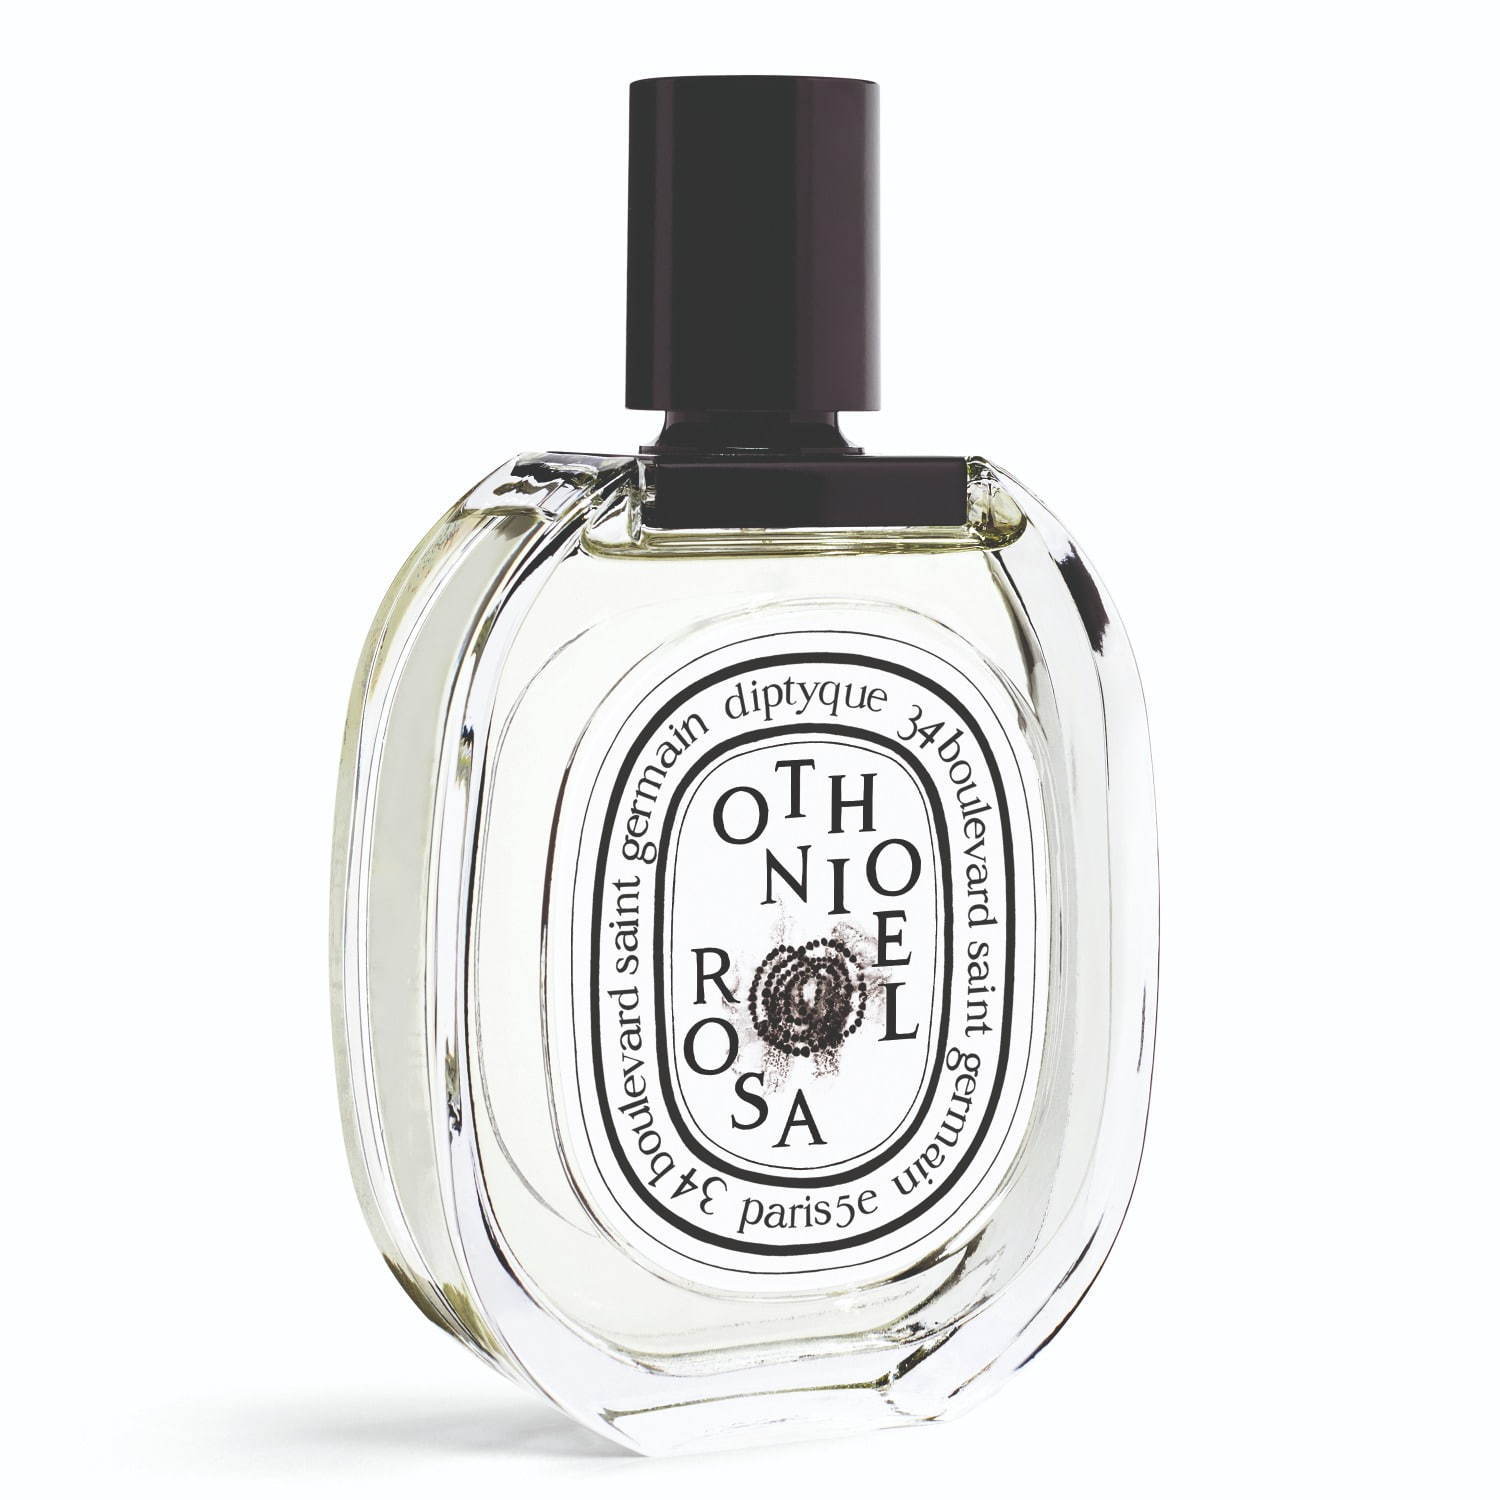 Othoniel Rosa Diptyque perfume - a fragrance for women and men 2020